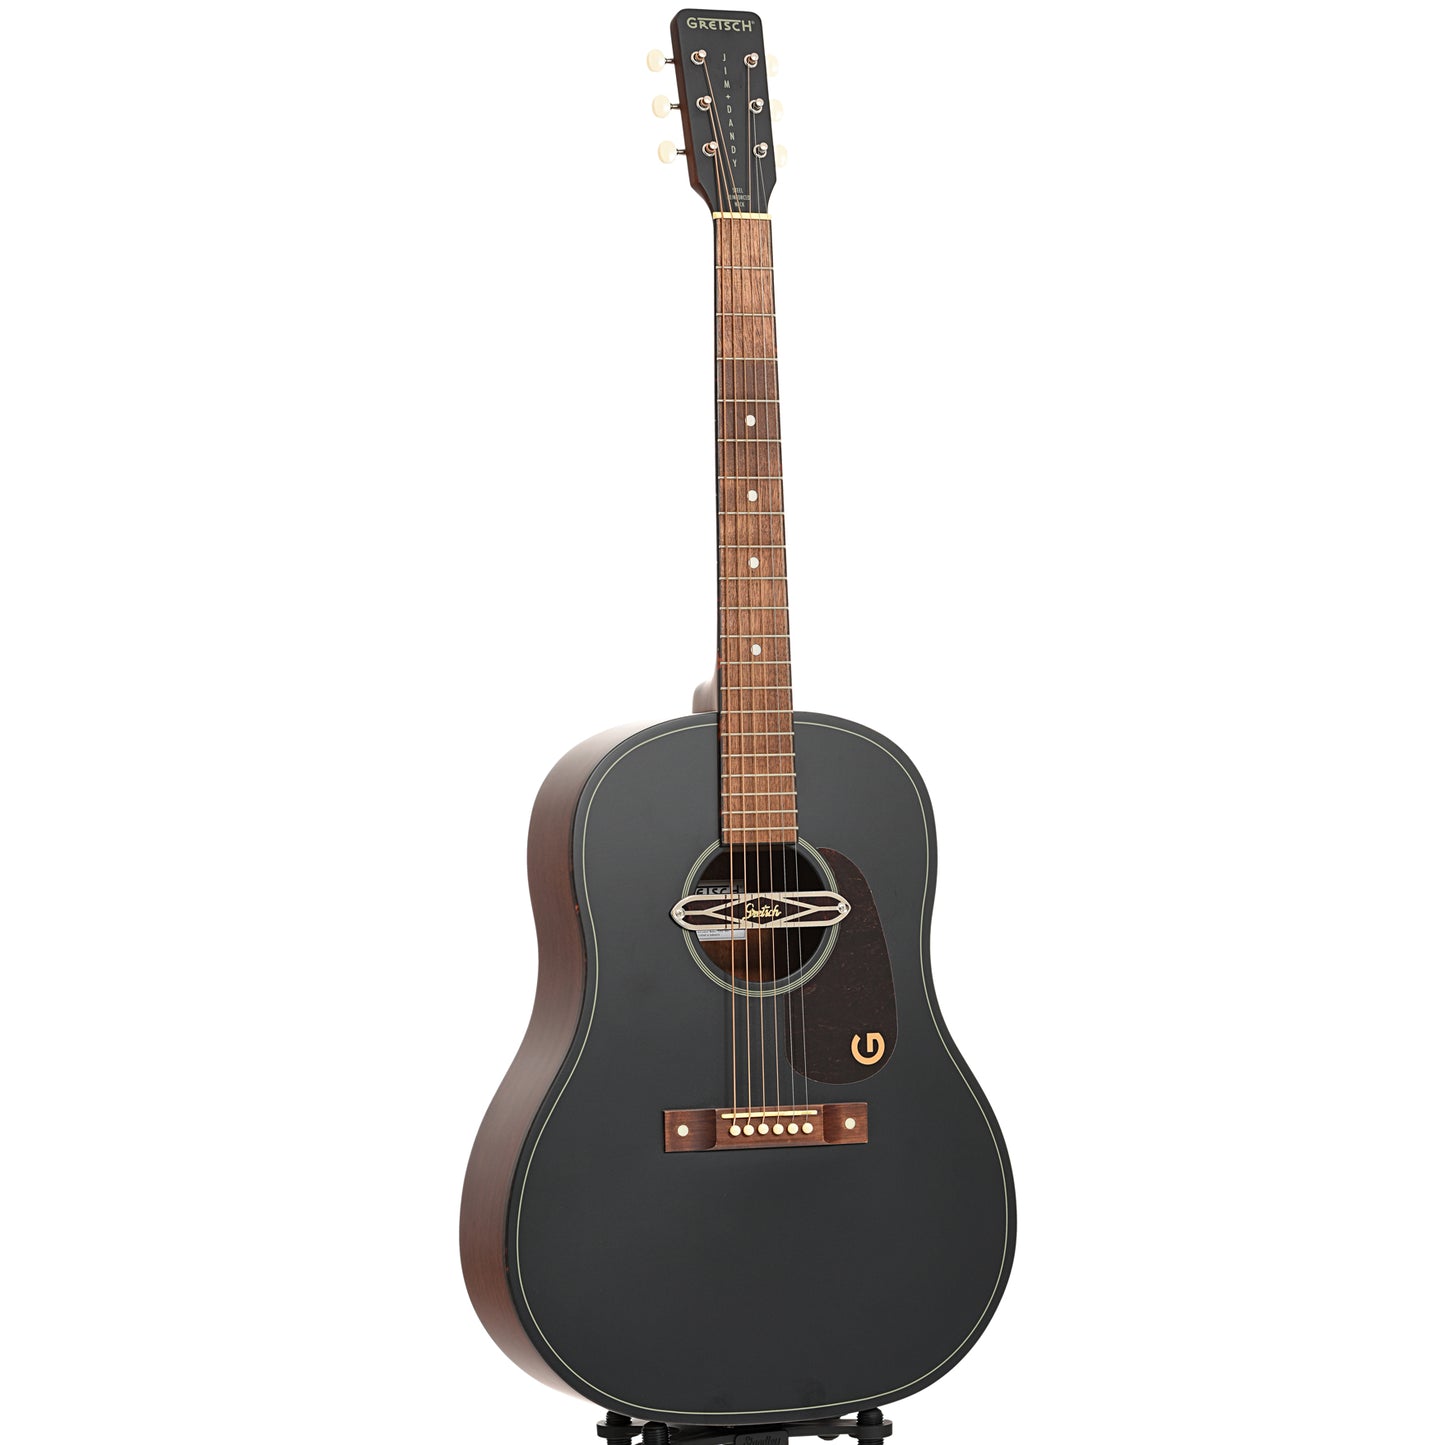 Full front and side of Gretsch Jim Dandy Deltoluxe Dreadnought Acoustic/Electric Guitar, Black Top